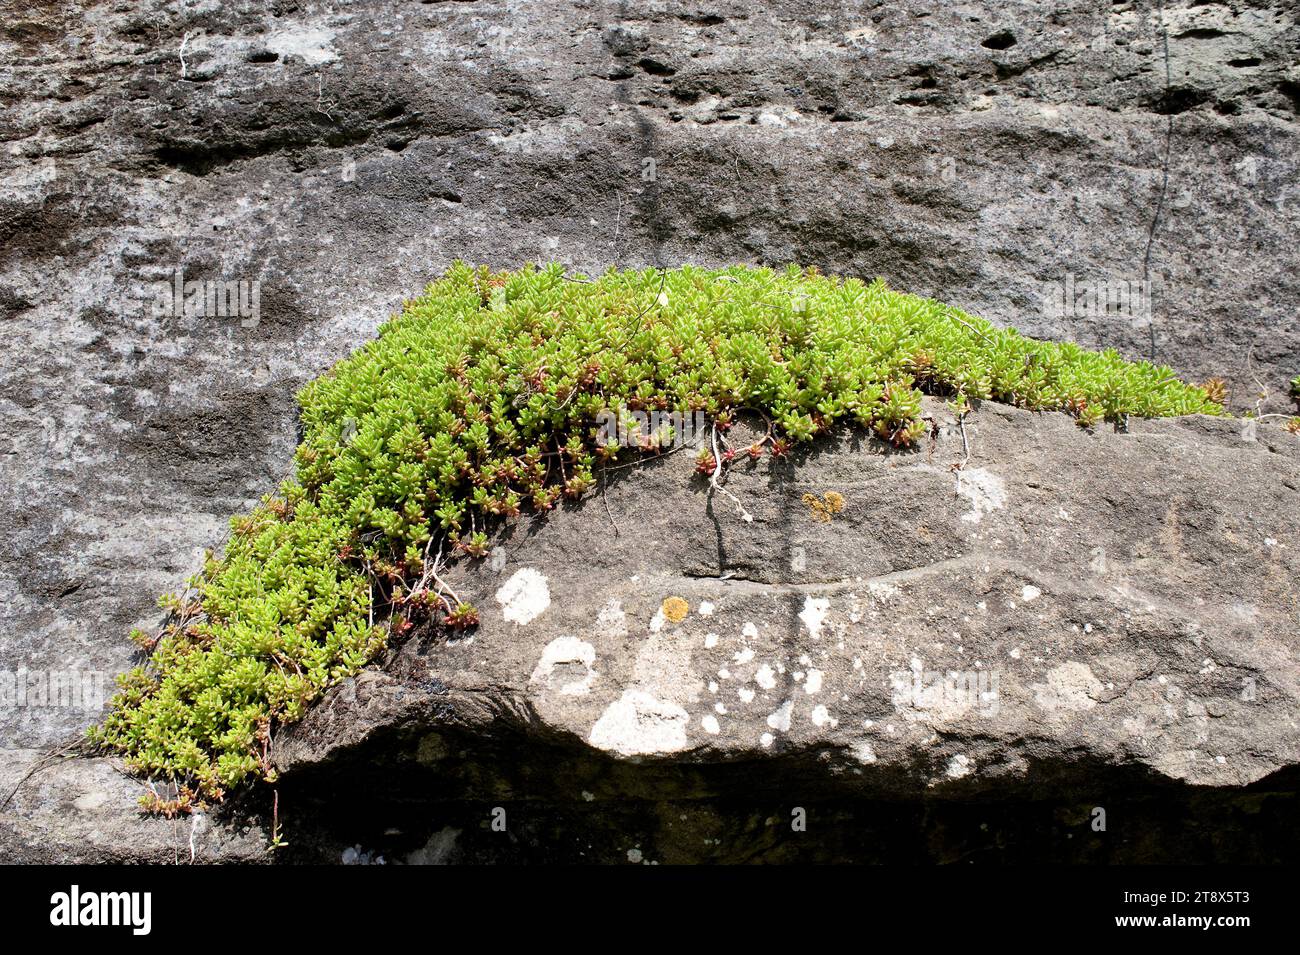 White stonecrop (Sedum album) is a succulent plant native to temperate regions of North Hemisphere. This photo was taken in Rupit, Barcelona province, Stock Photo